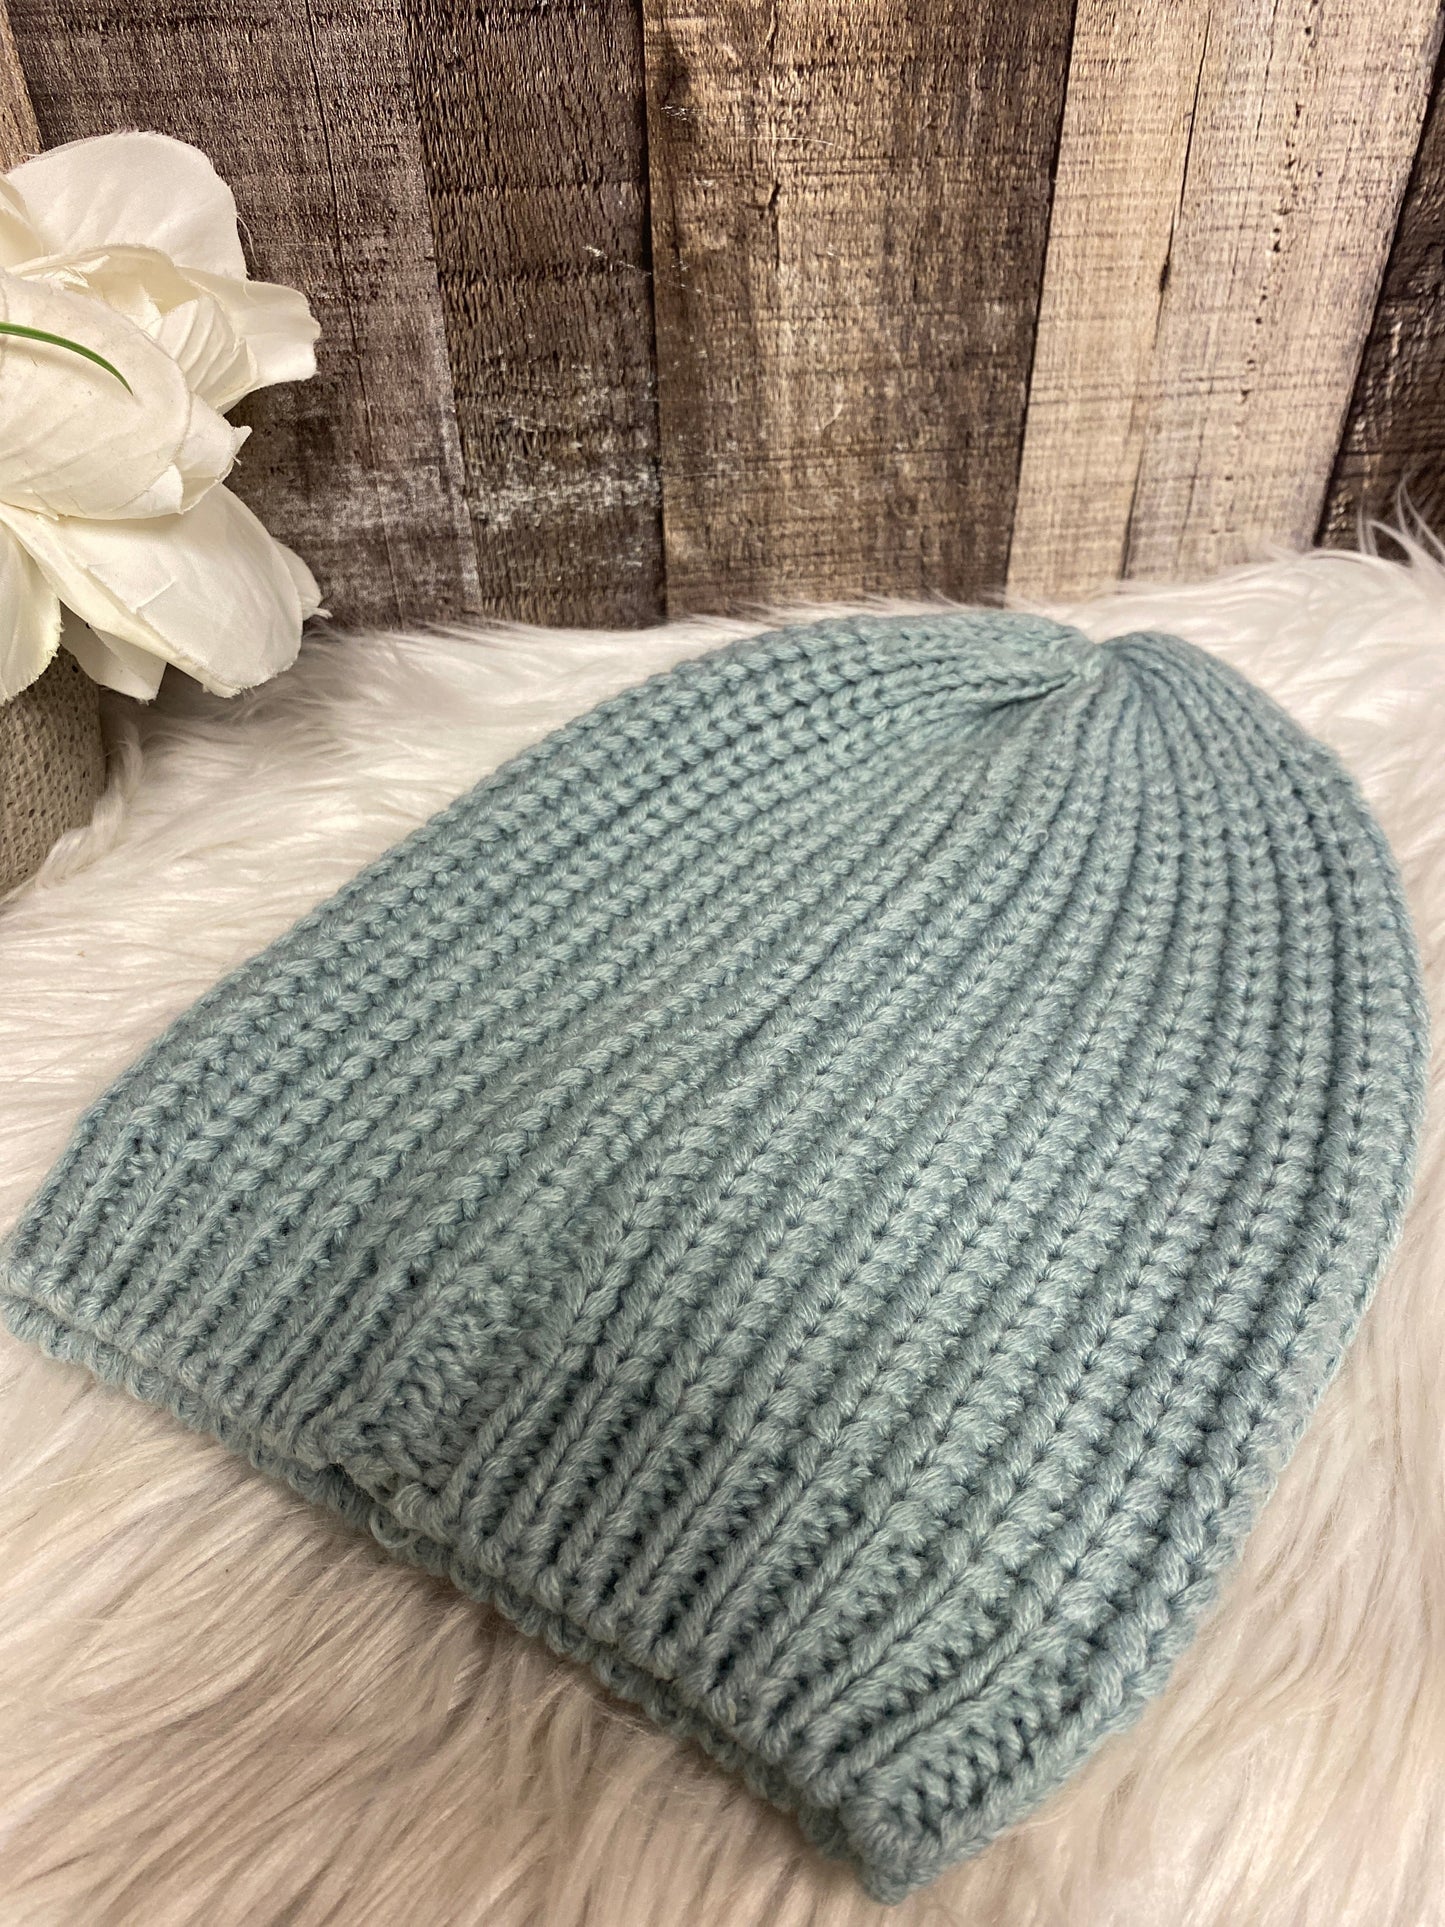 Hat Beanie By Cme